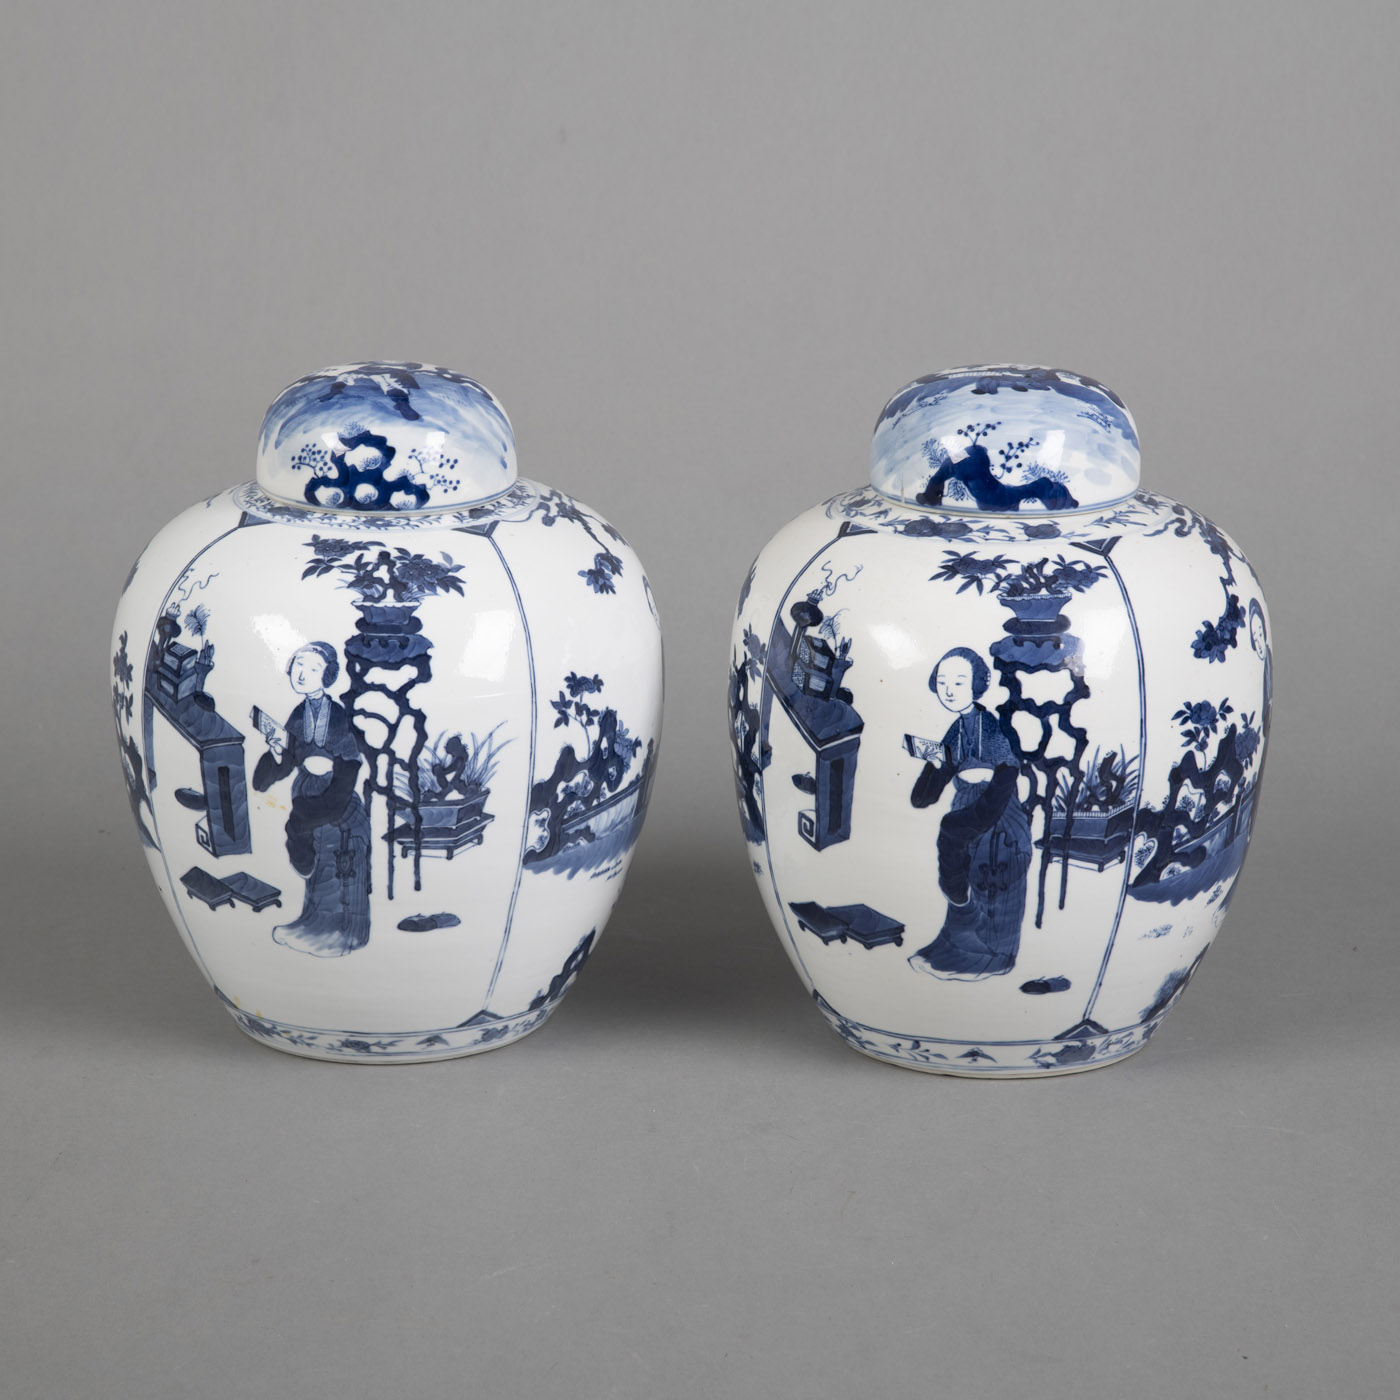 <b>A PAIR OF BLUE AND WHITE 'ELEGANT LADIES' PORCELAIN VASES AND COVERS</b>